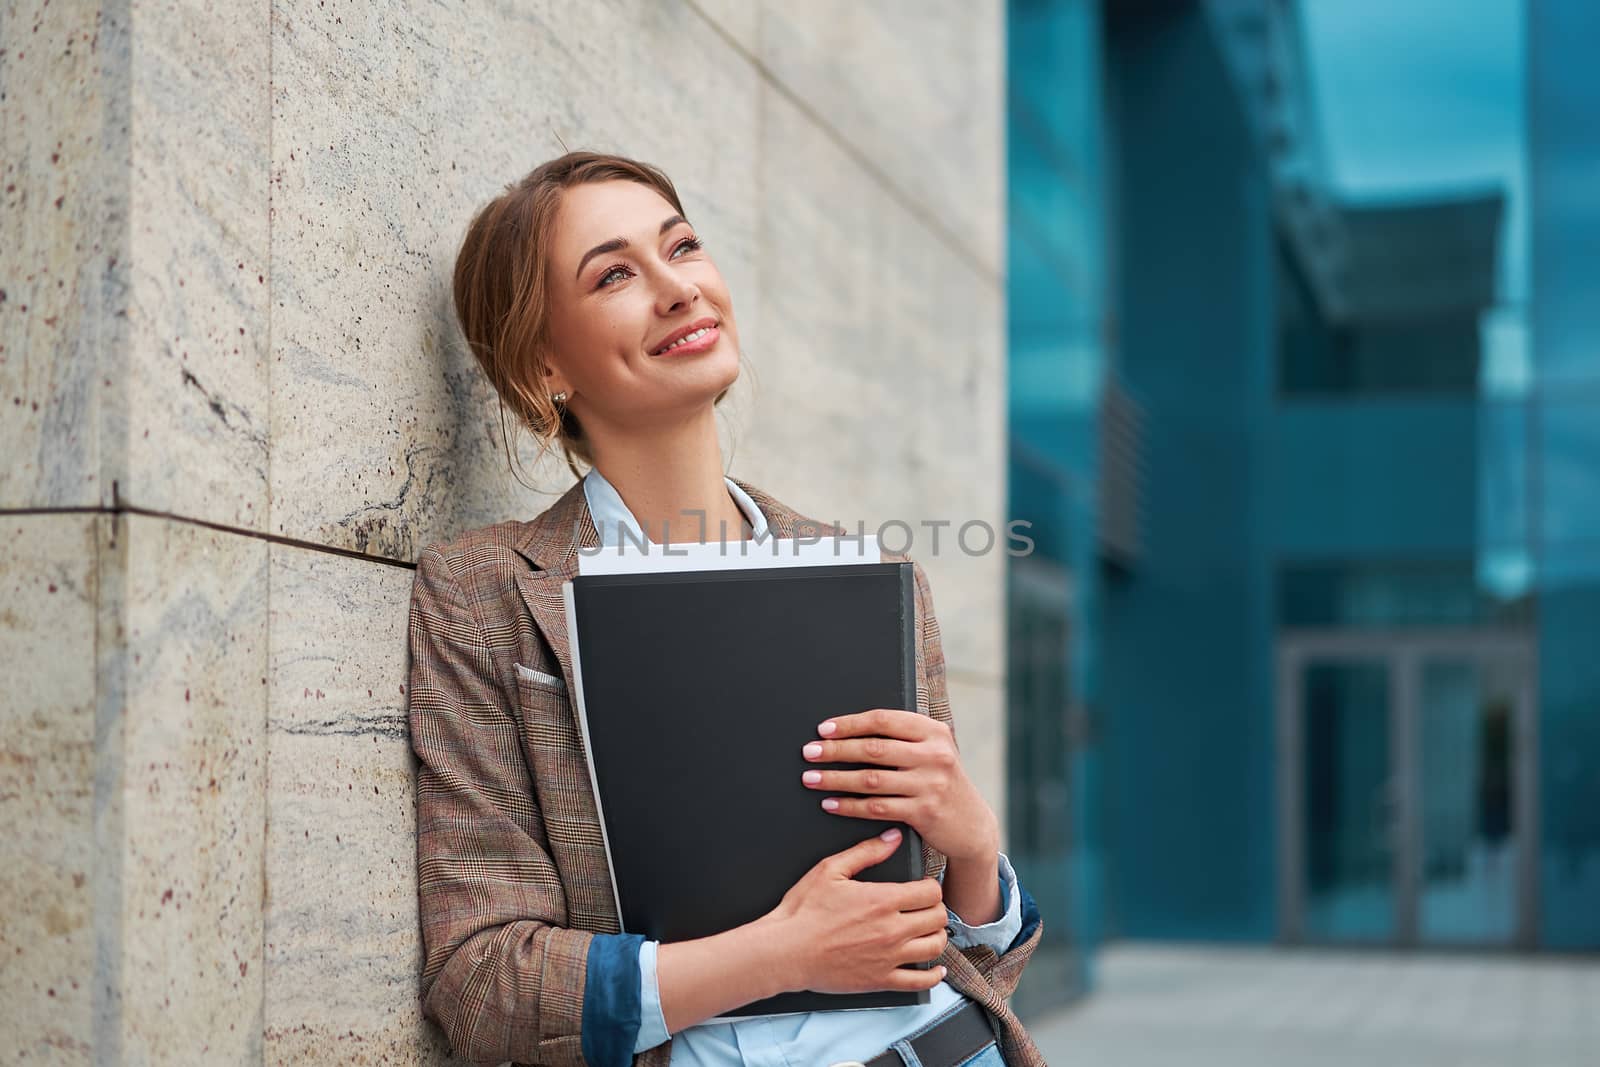 Businesswoman successful woman business person standing outdoor corporate building exterior Pensive elegance cute caucasian confidence professional business woman holding folder documents Bank worker